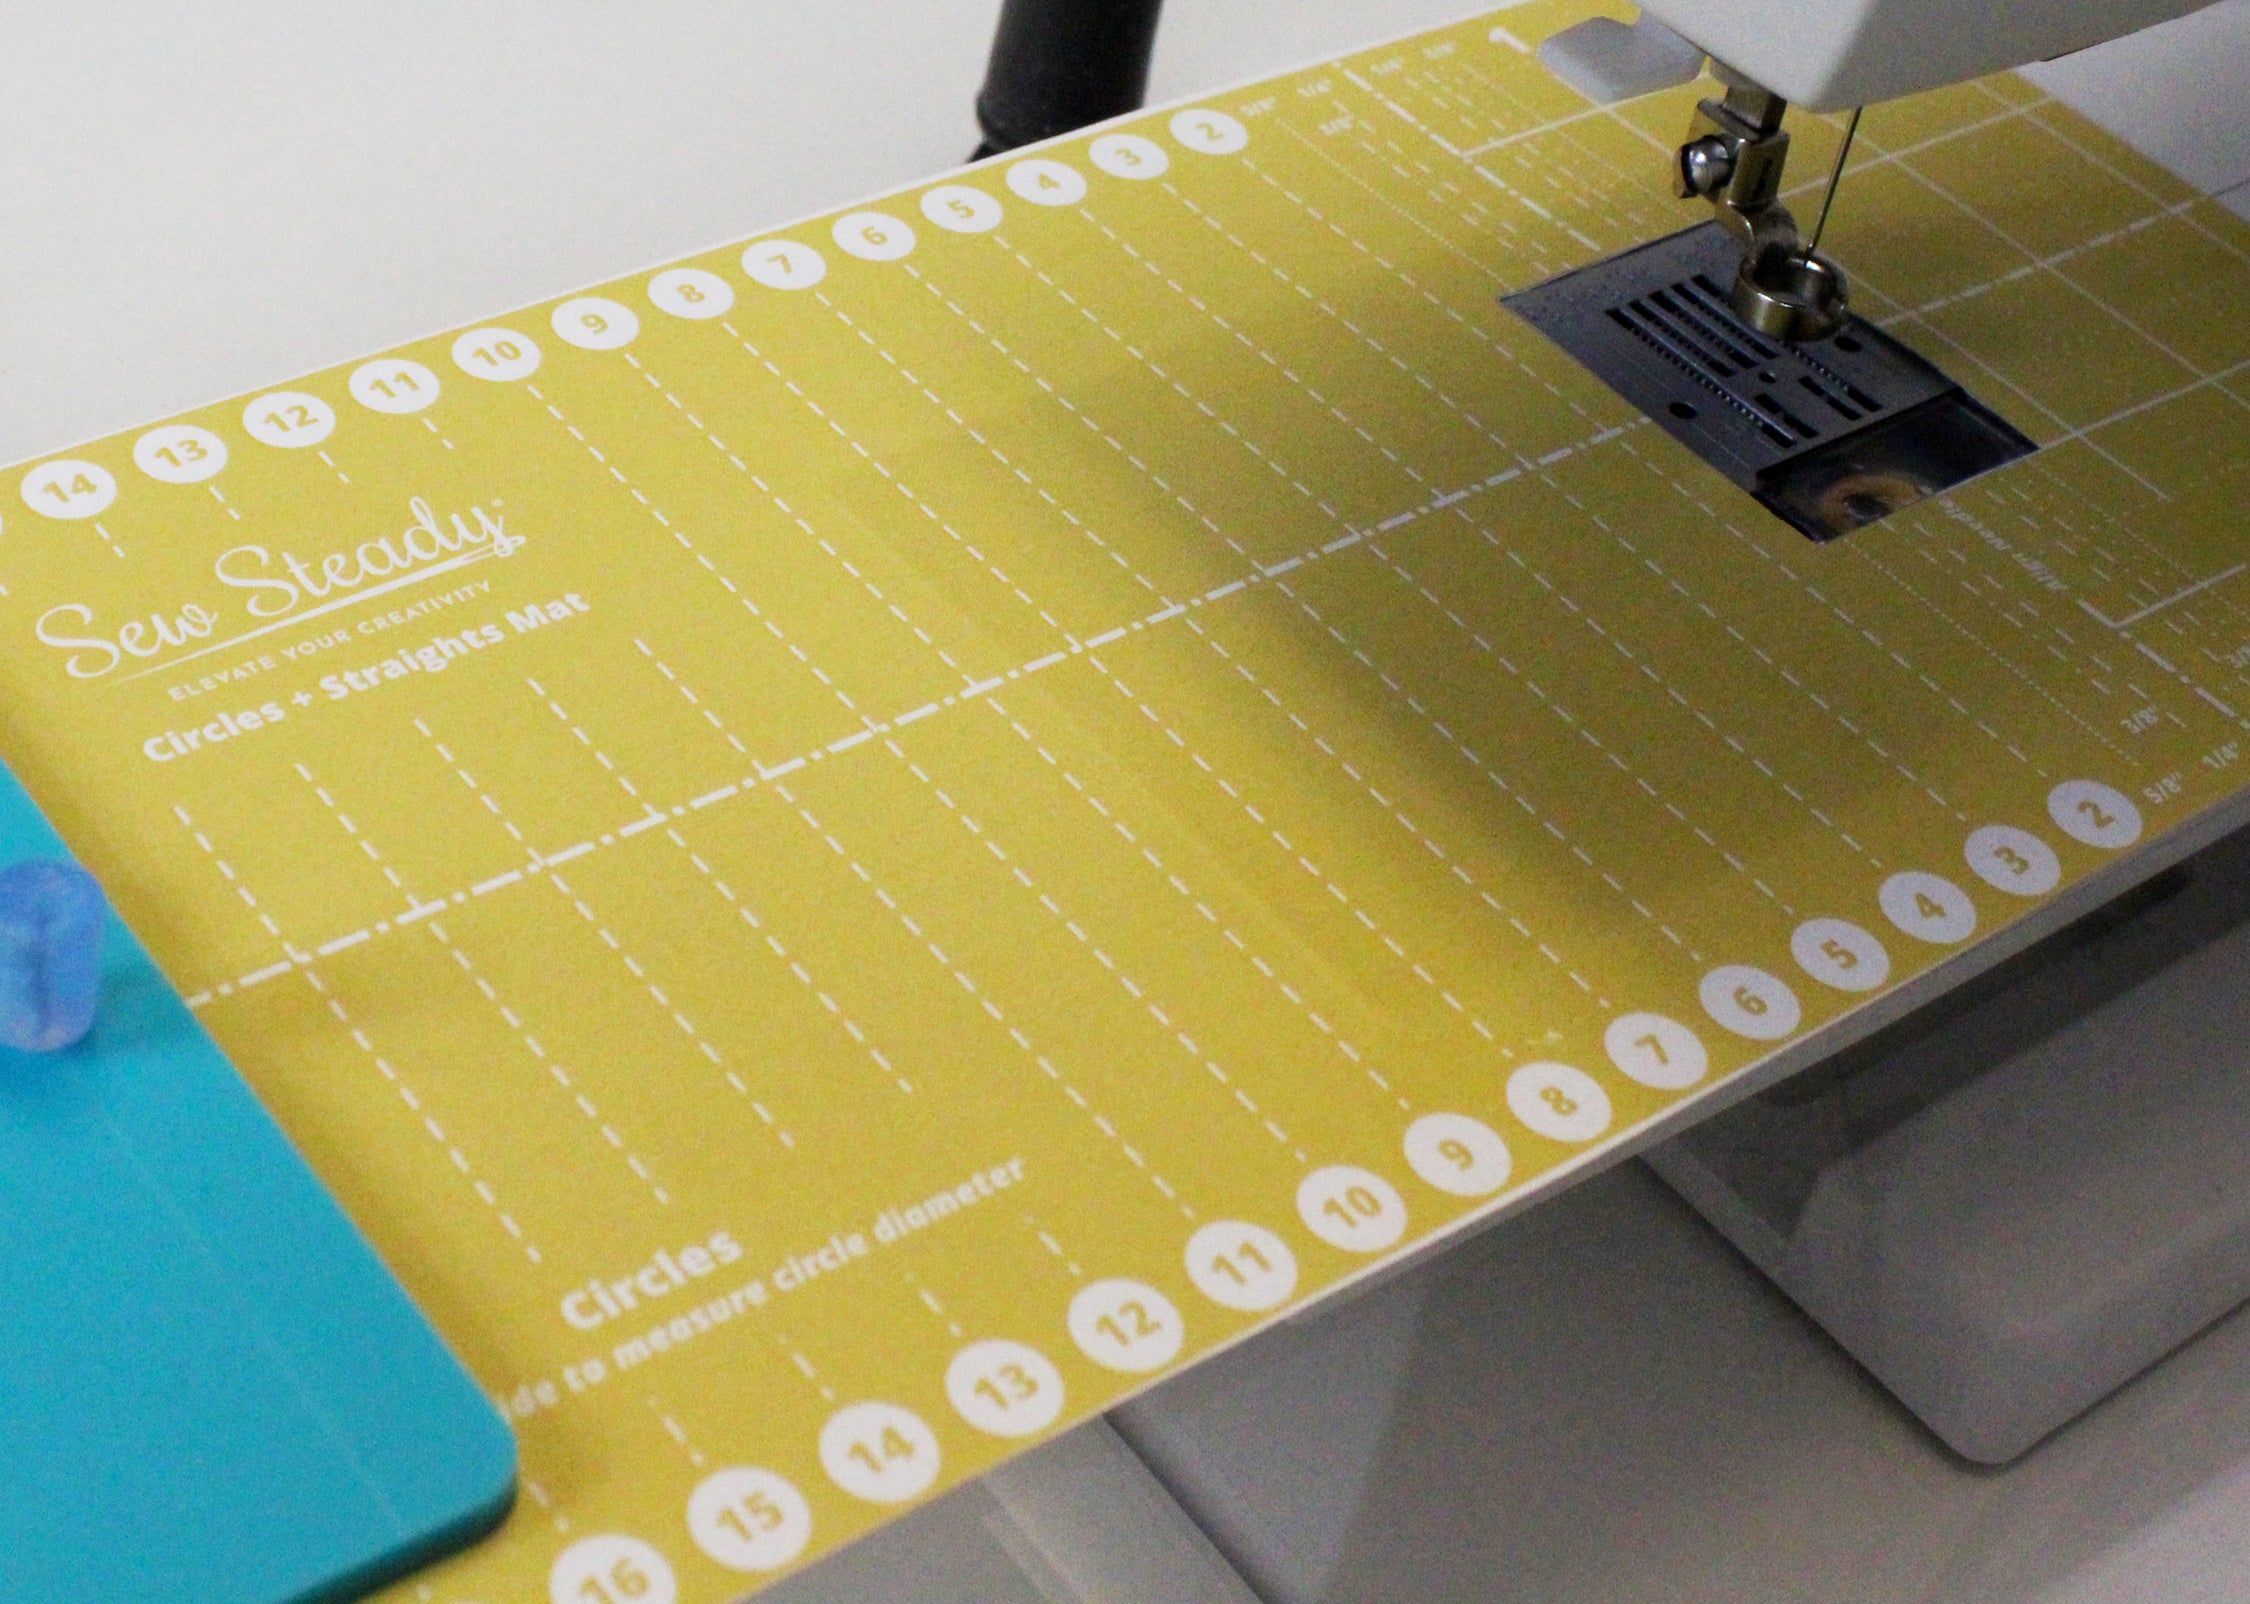 Sew Steady Universal Circles + Straights Tool and Mat